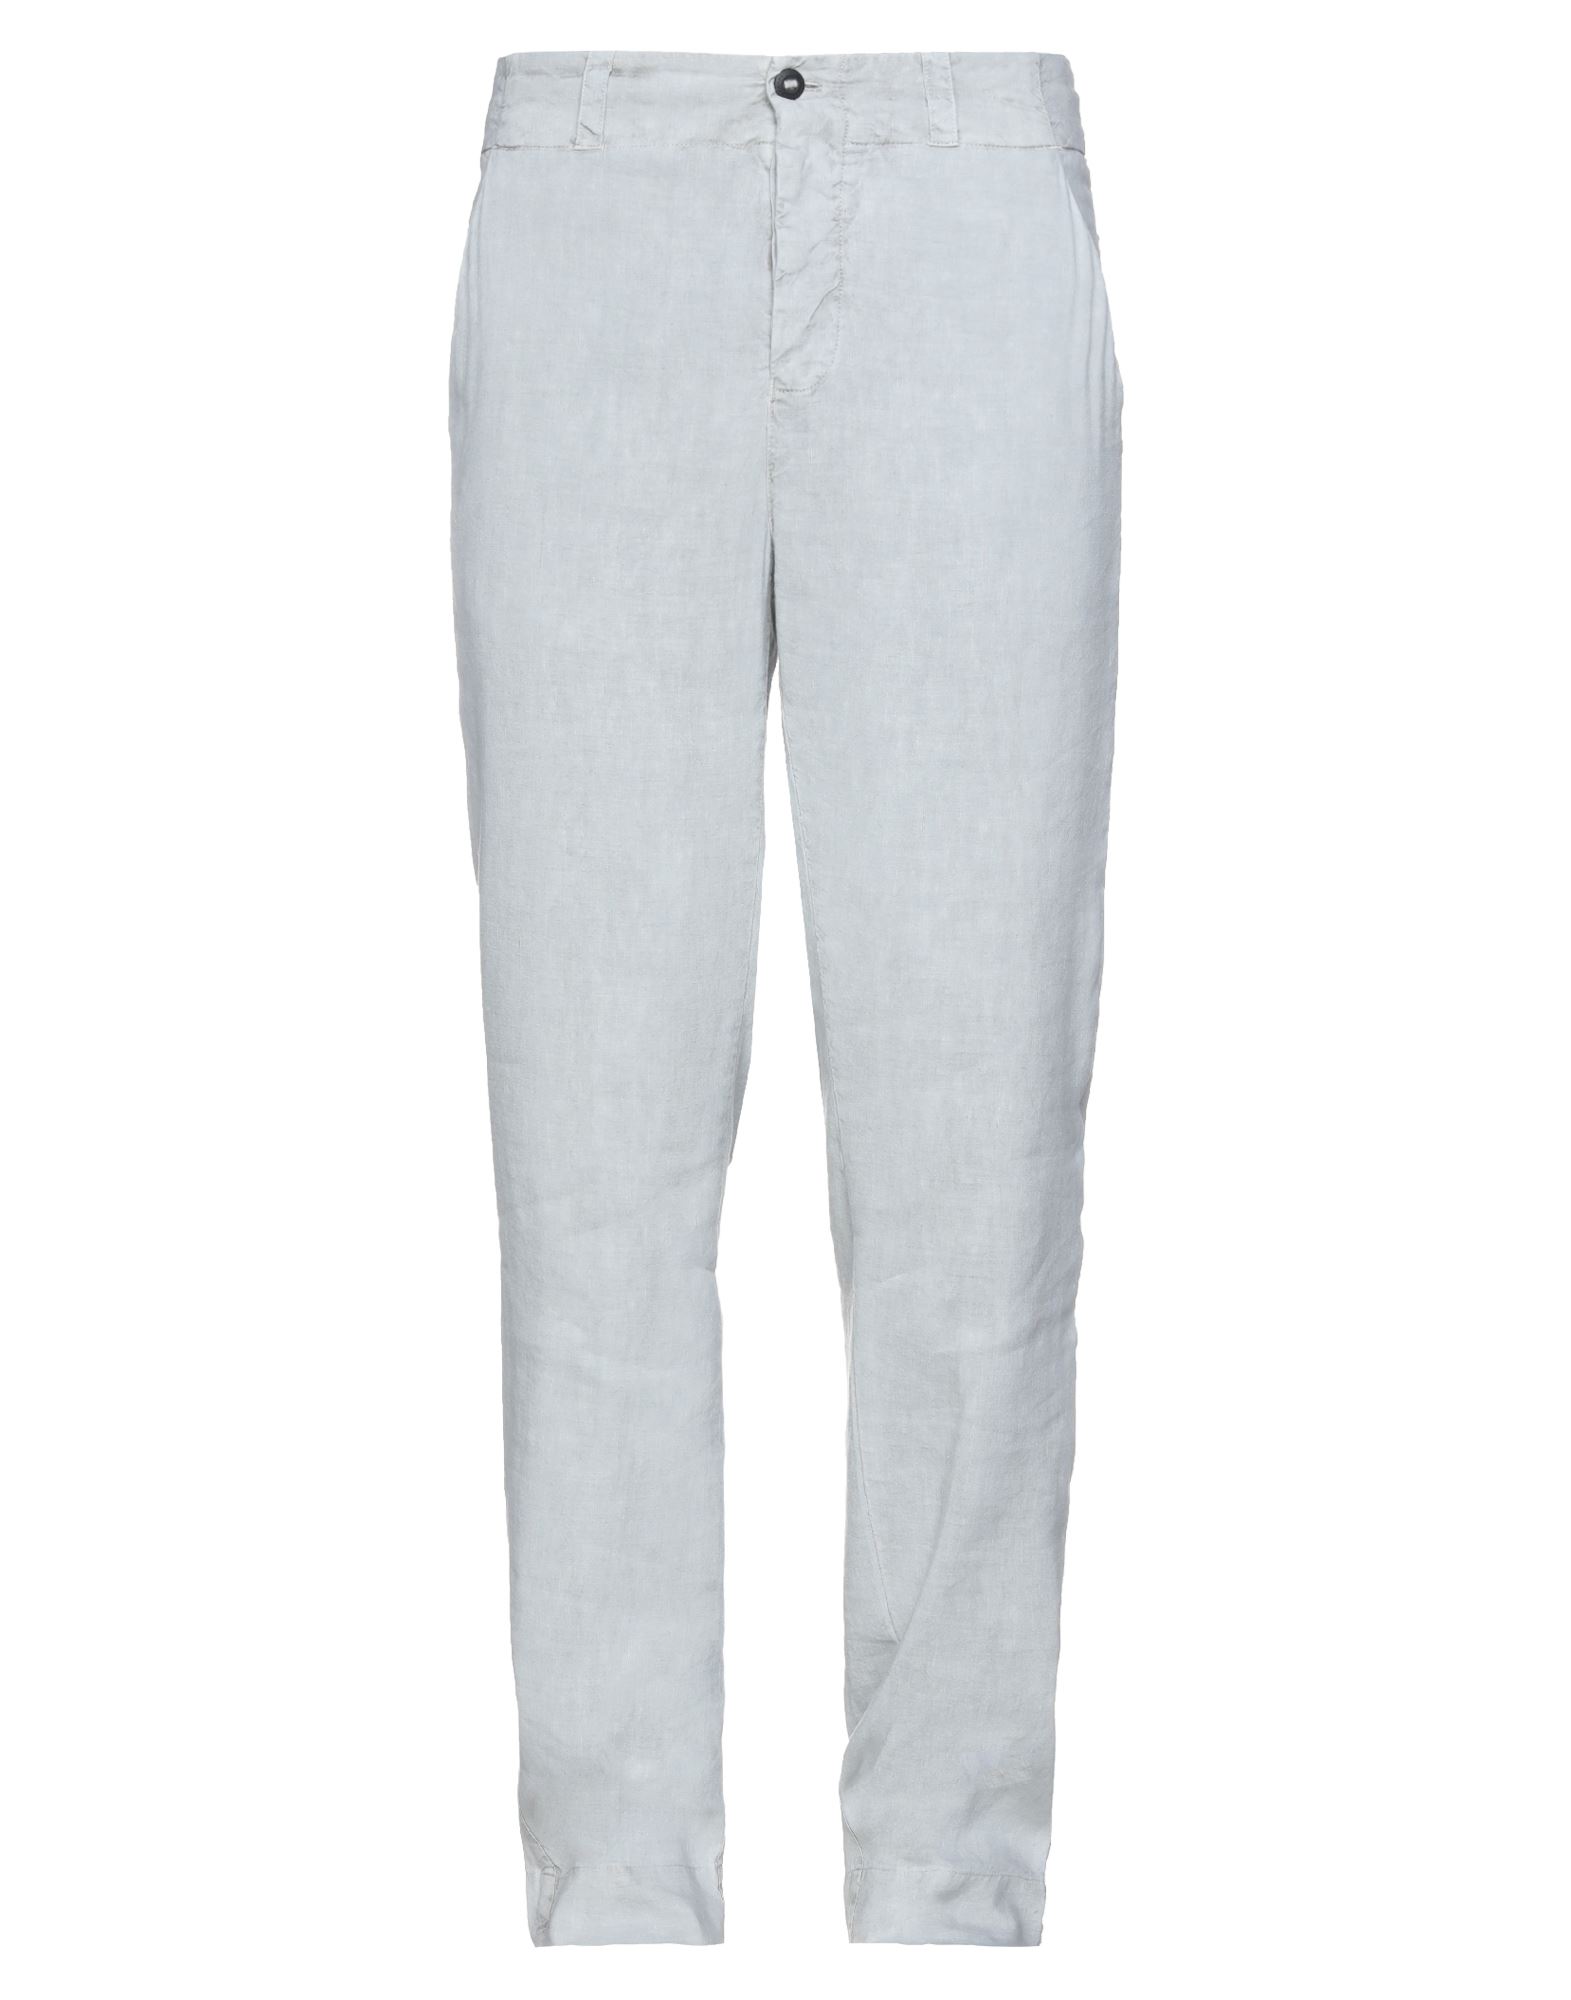 Hannes Roether Pants In Light Grey